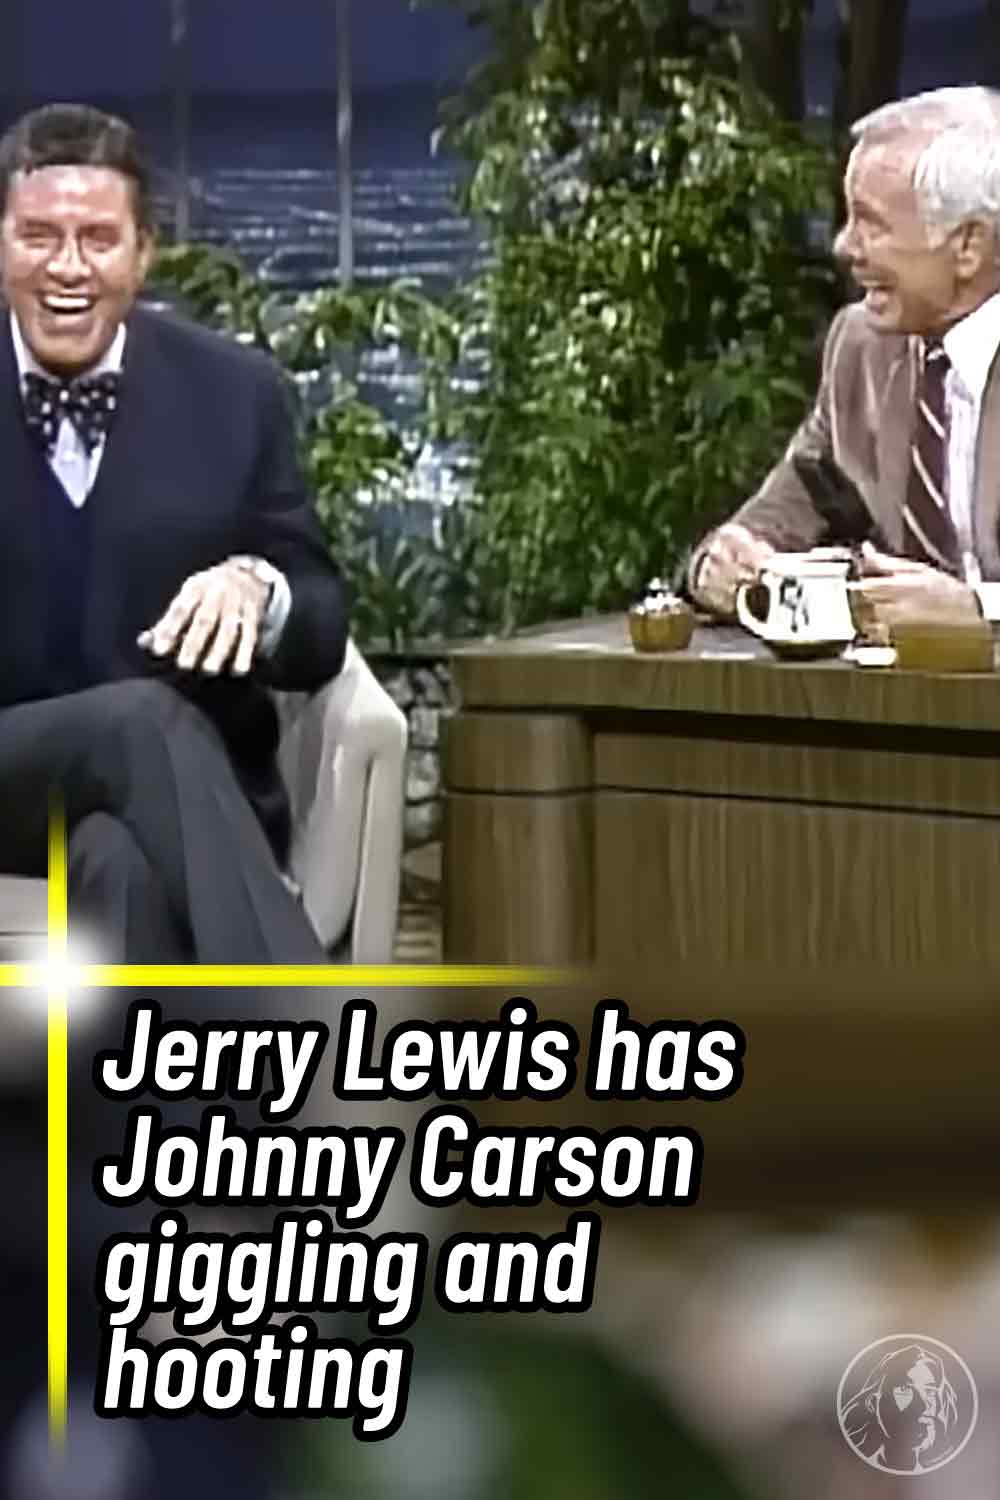 Jerry Lewis has Johnny Carson giggling and hooting